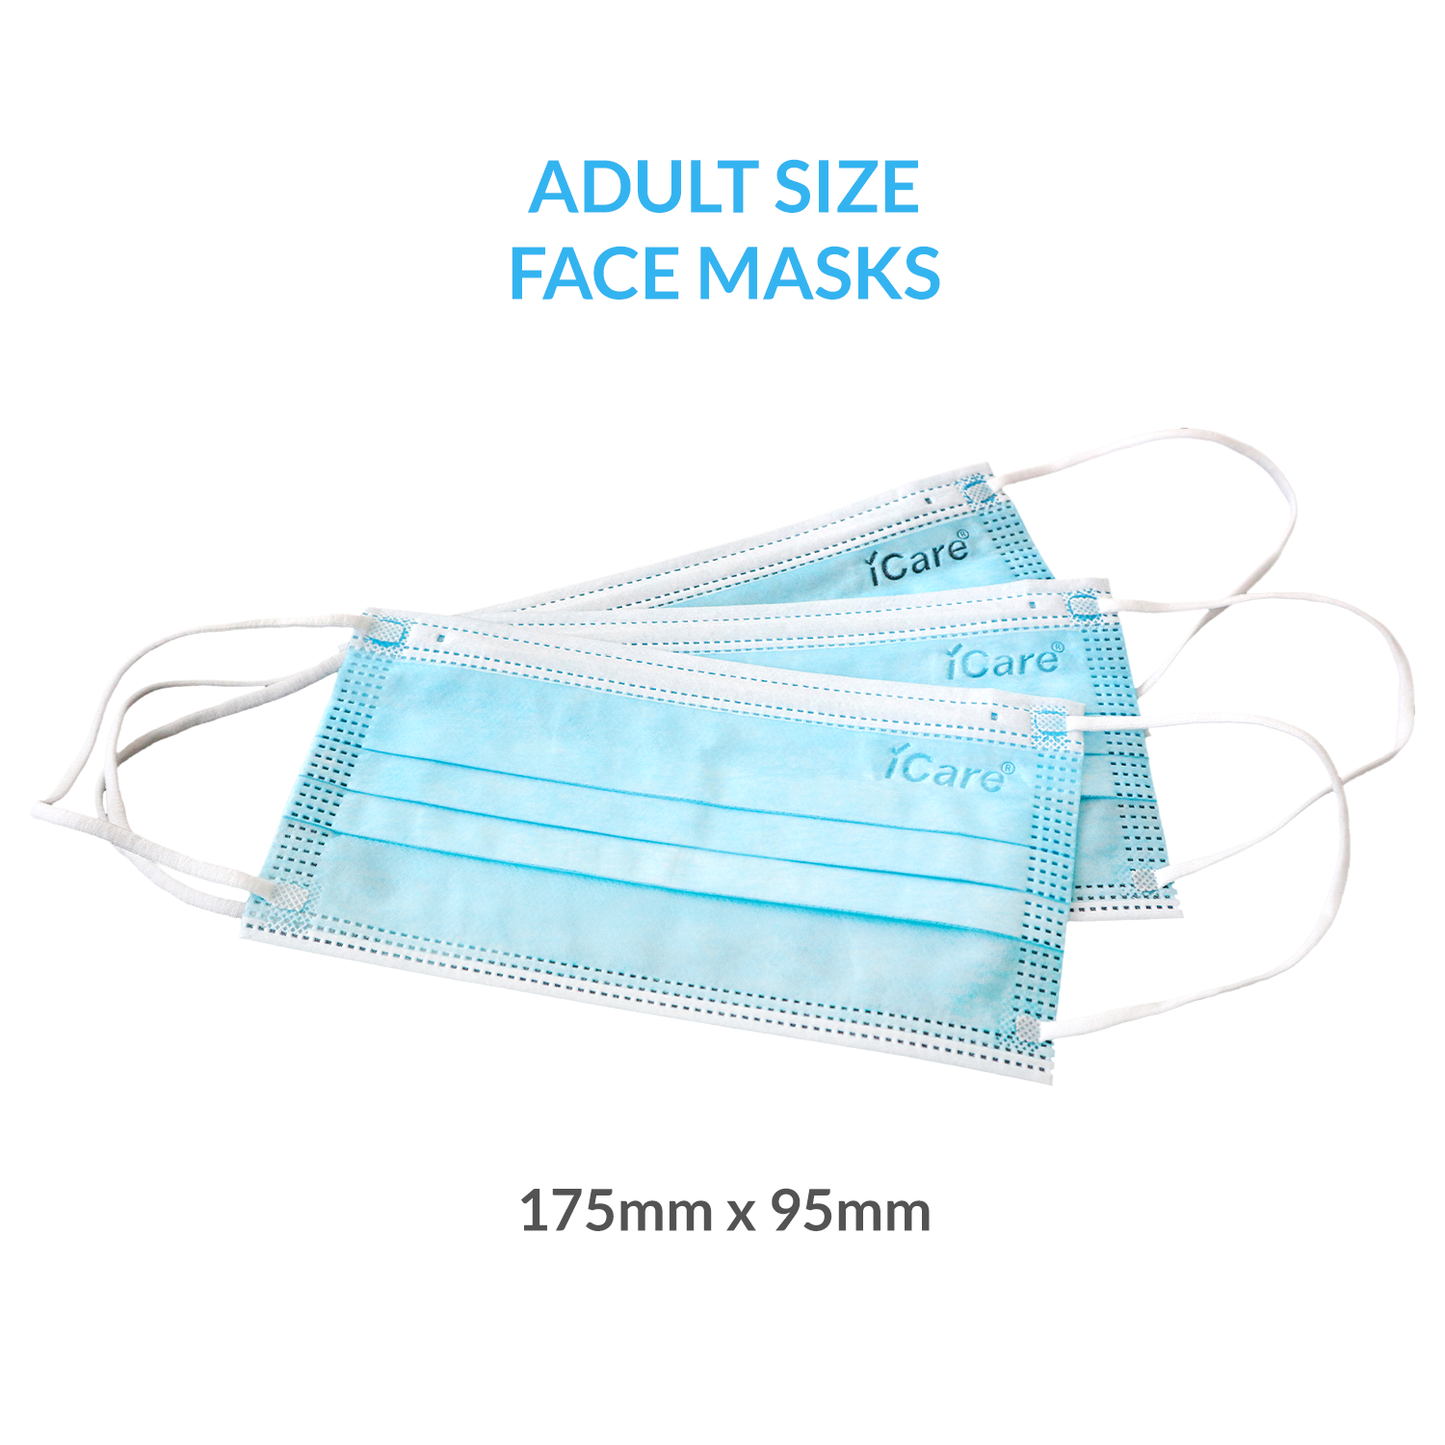 iCare® REF285 Disposable Face Mask ( Type II For Medical Use) 5 Boxes(250pcs) with Comfortable Elastic Earloop and Embedded Nose Clip Design, 3ply Breathable Melt-Blown and Non-Woven Fabric for Home, Office and Outdoor